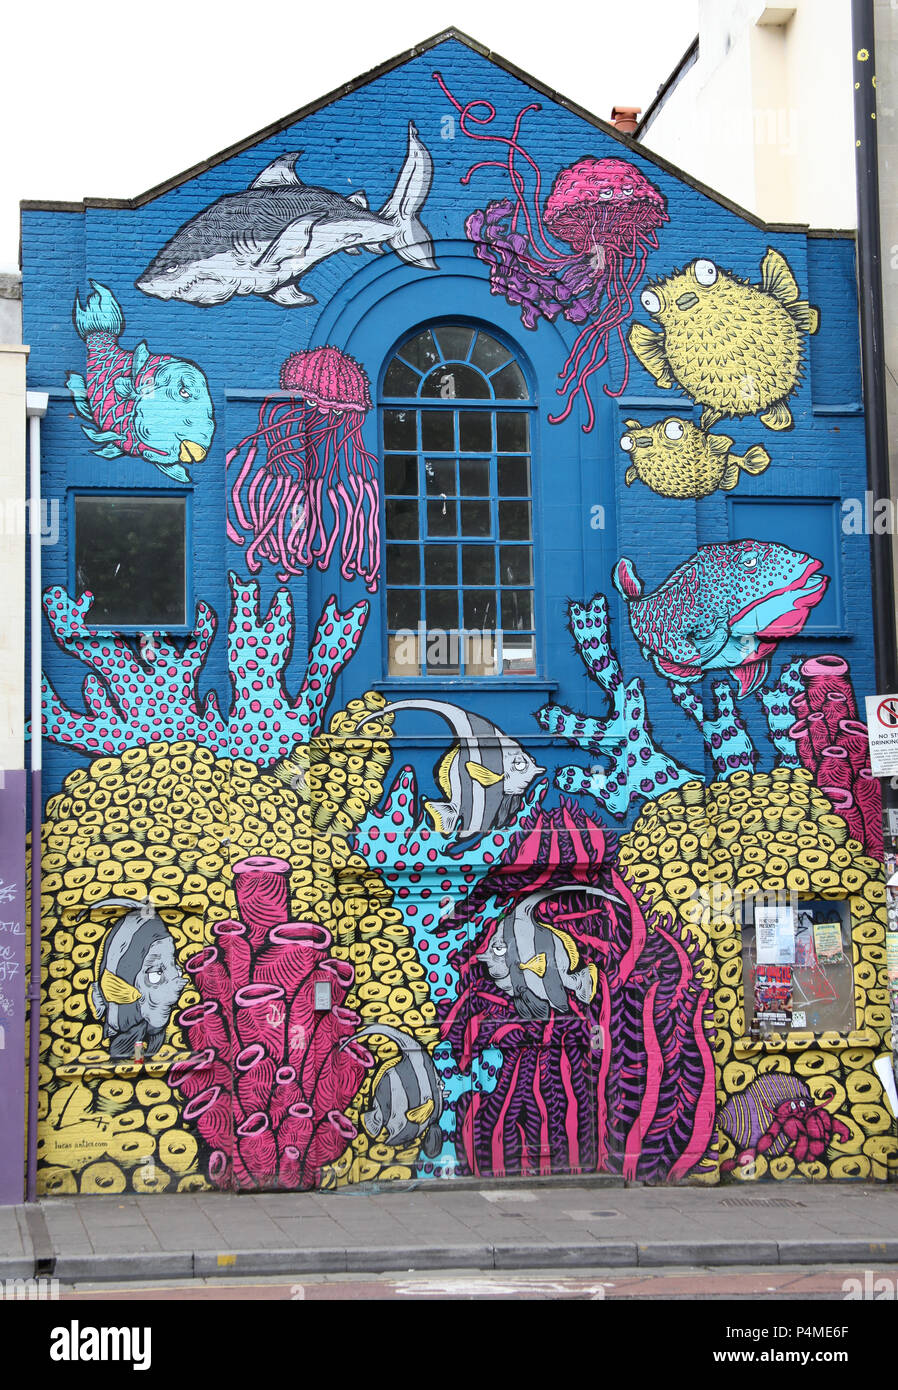 A building in Stokes Croft, Bristol, England painted with fish and an ocean scene. Stock Photo